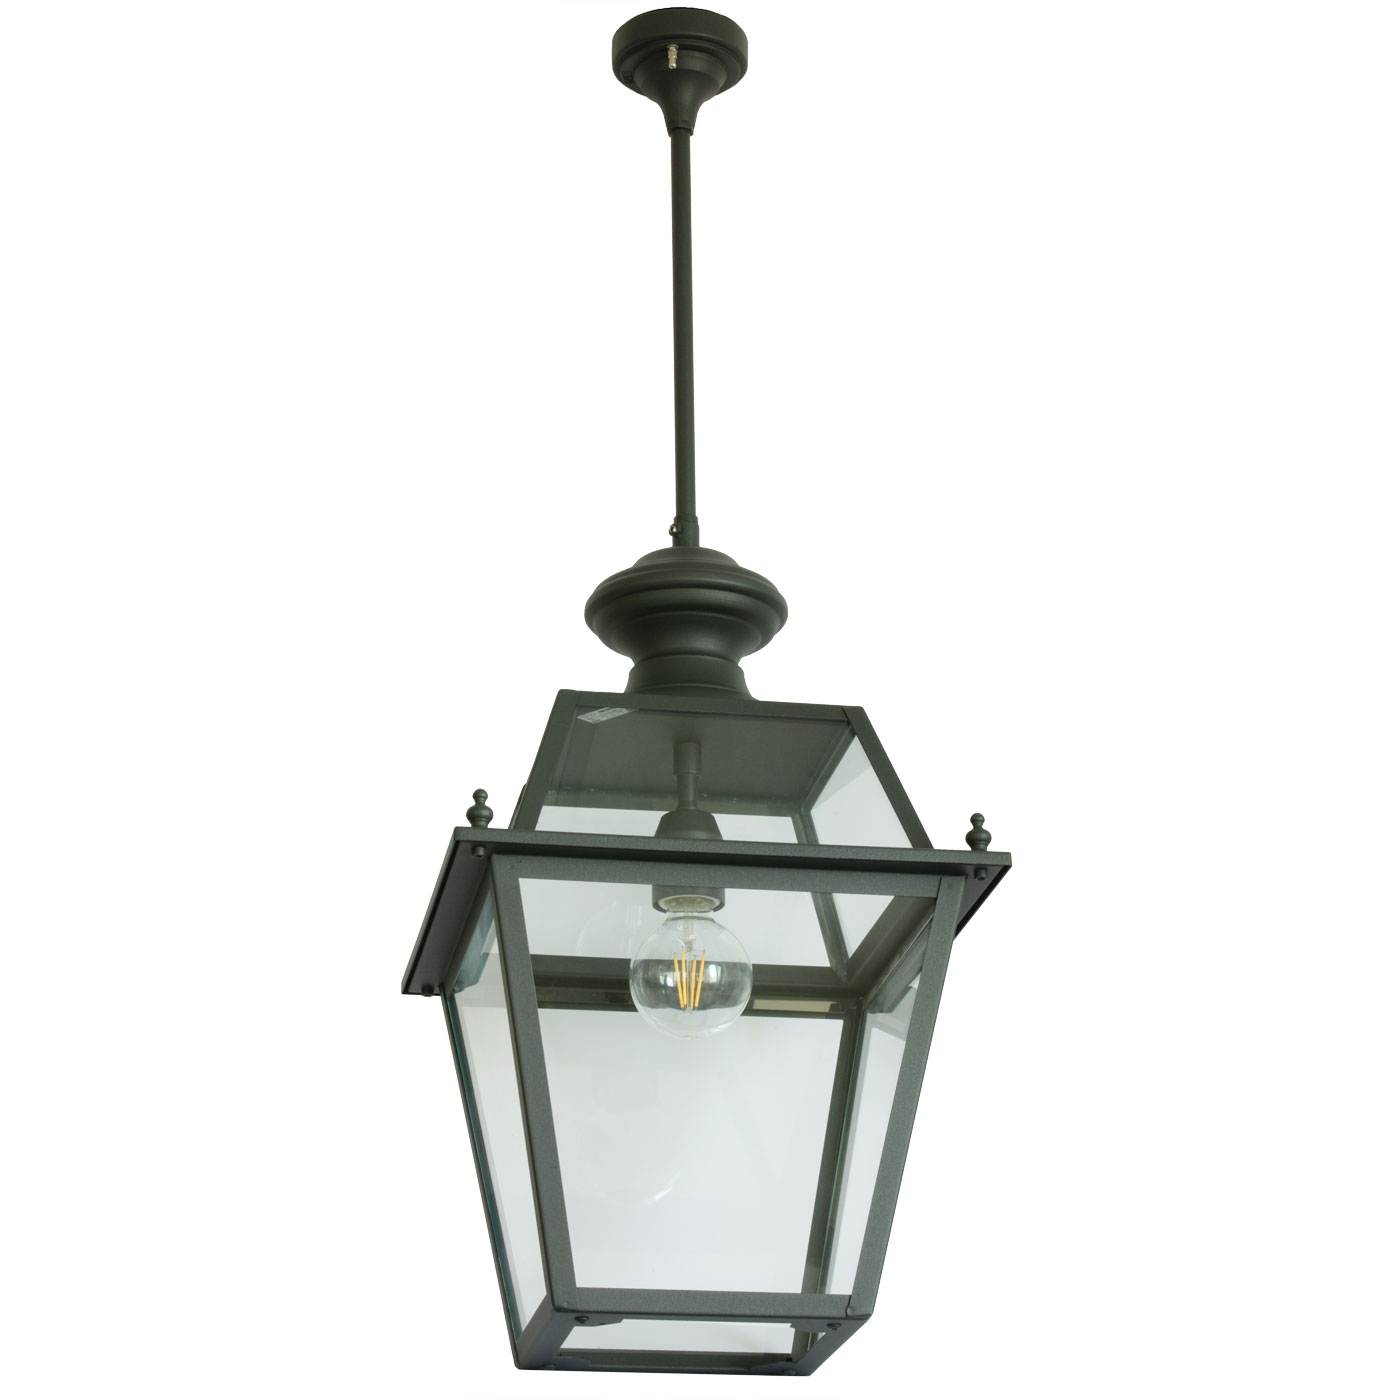 Italian Stainless Steel Ceiling Lantern for Outdoor Use